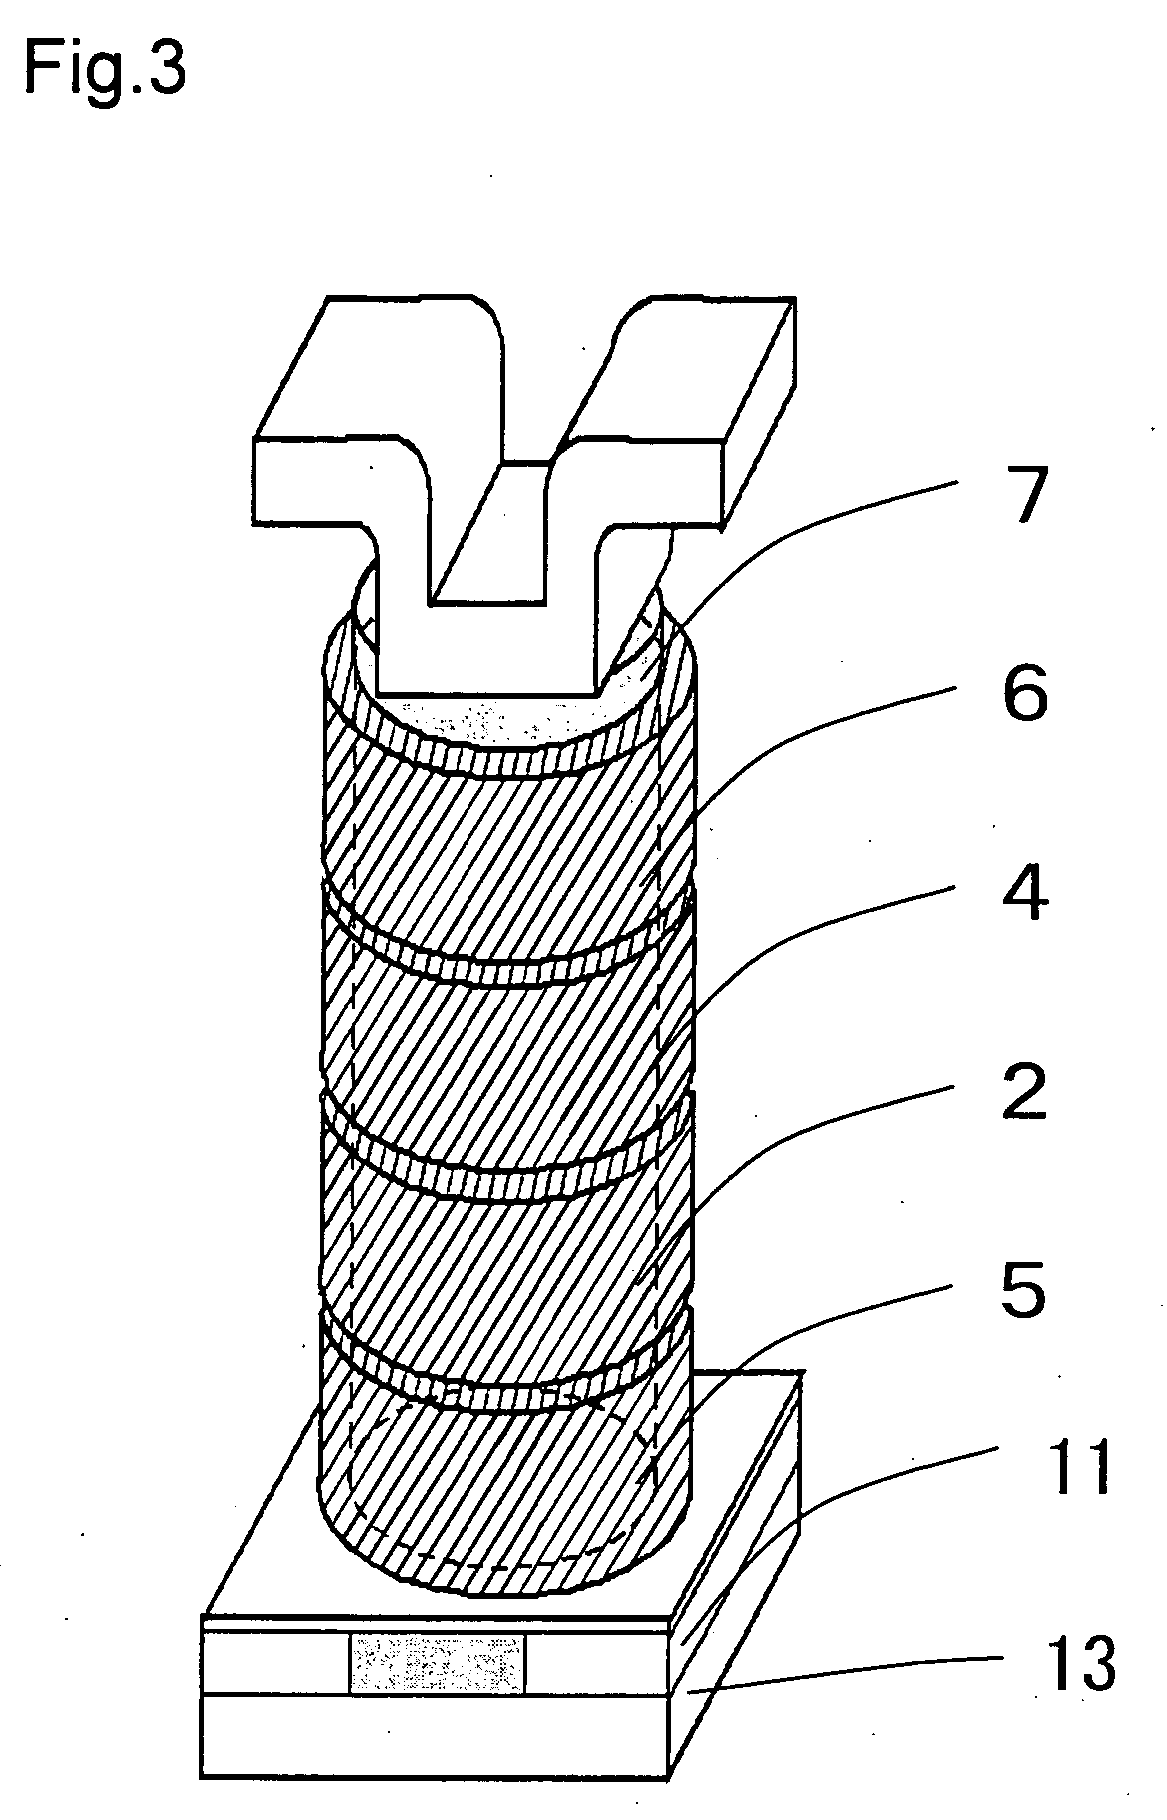 Memory cell unit, nonvolatile semiconductor device, and liquid crystal display device including the nonvolatile semiconductor device